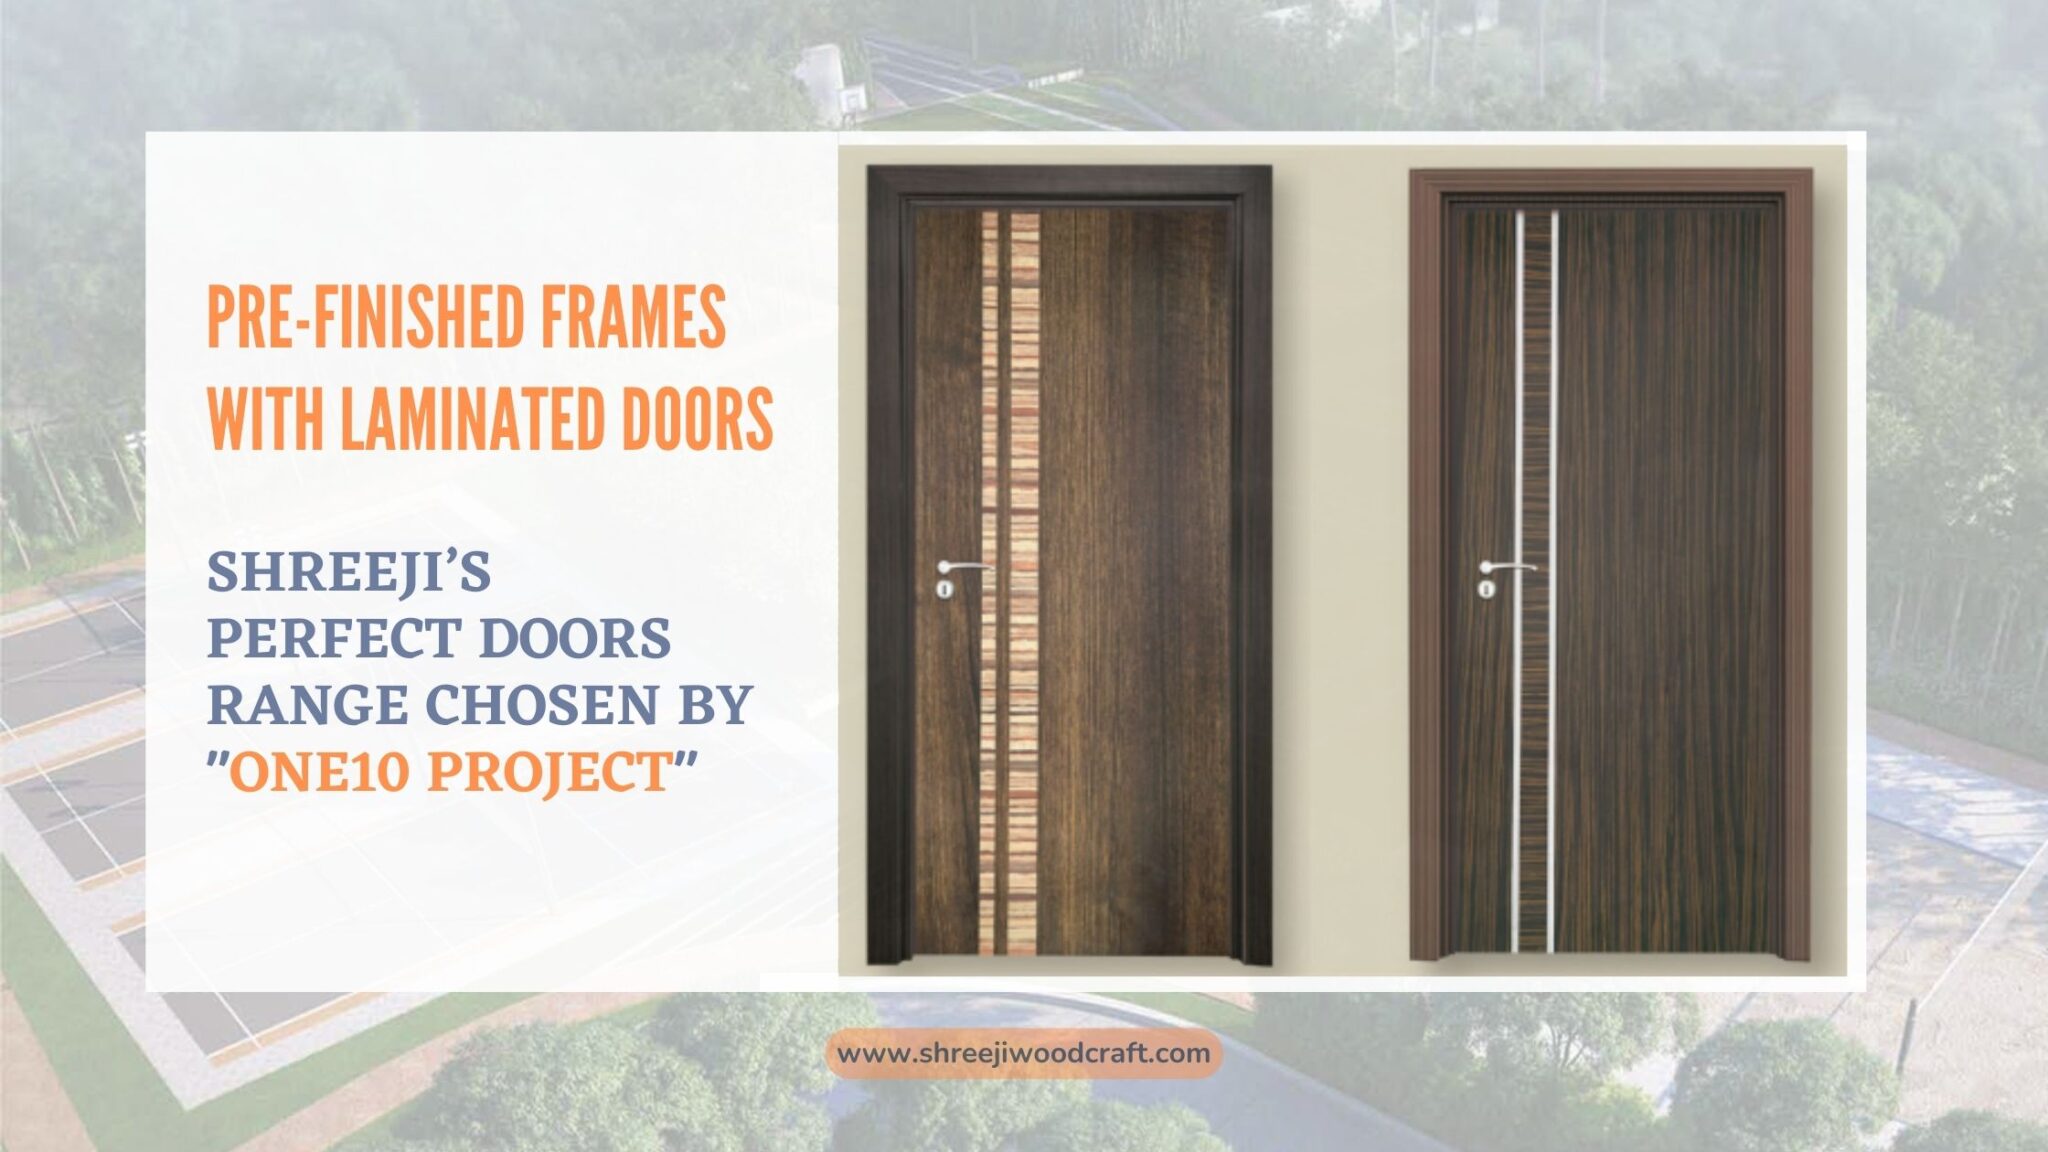 Pre-Finished Frames With Laminated Doors - Shreeji’s Perfect Doors Range Chosen By One10 Project